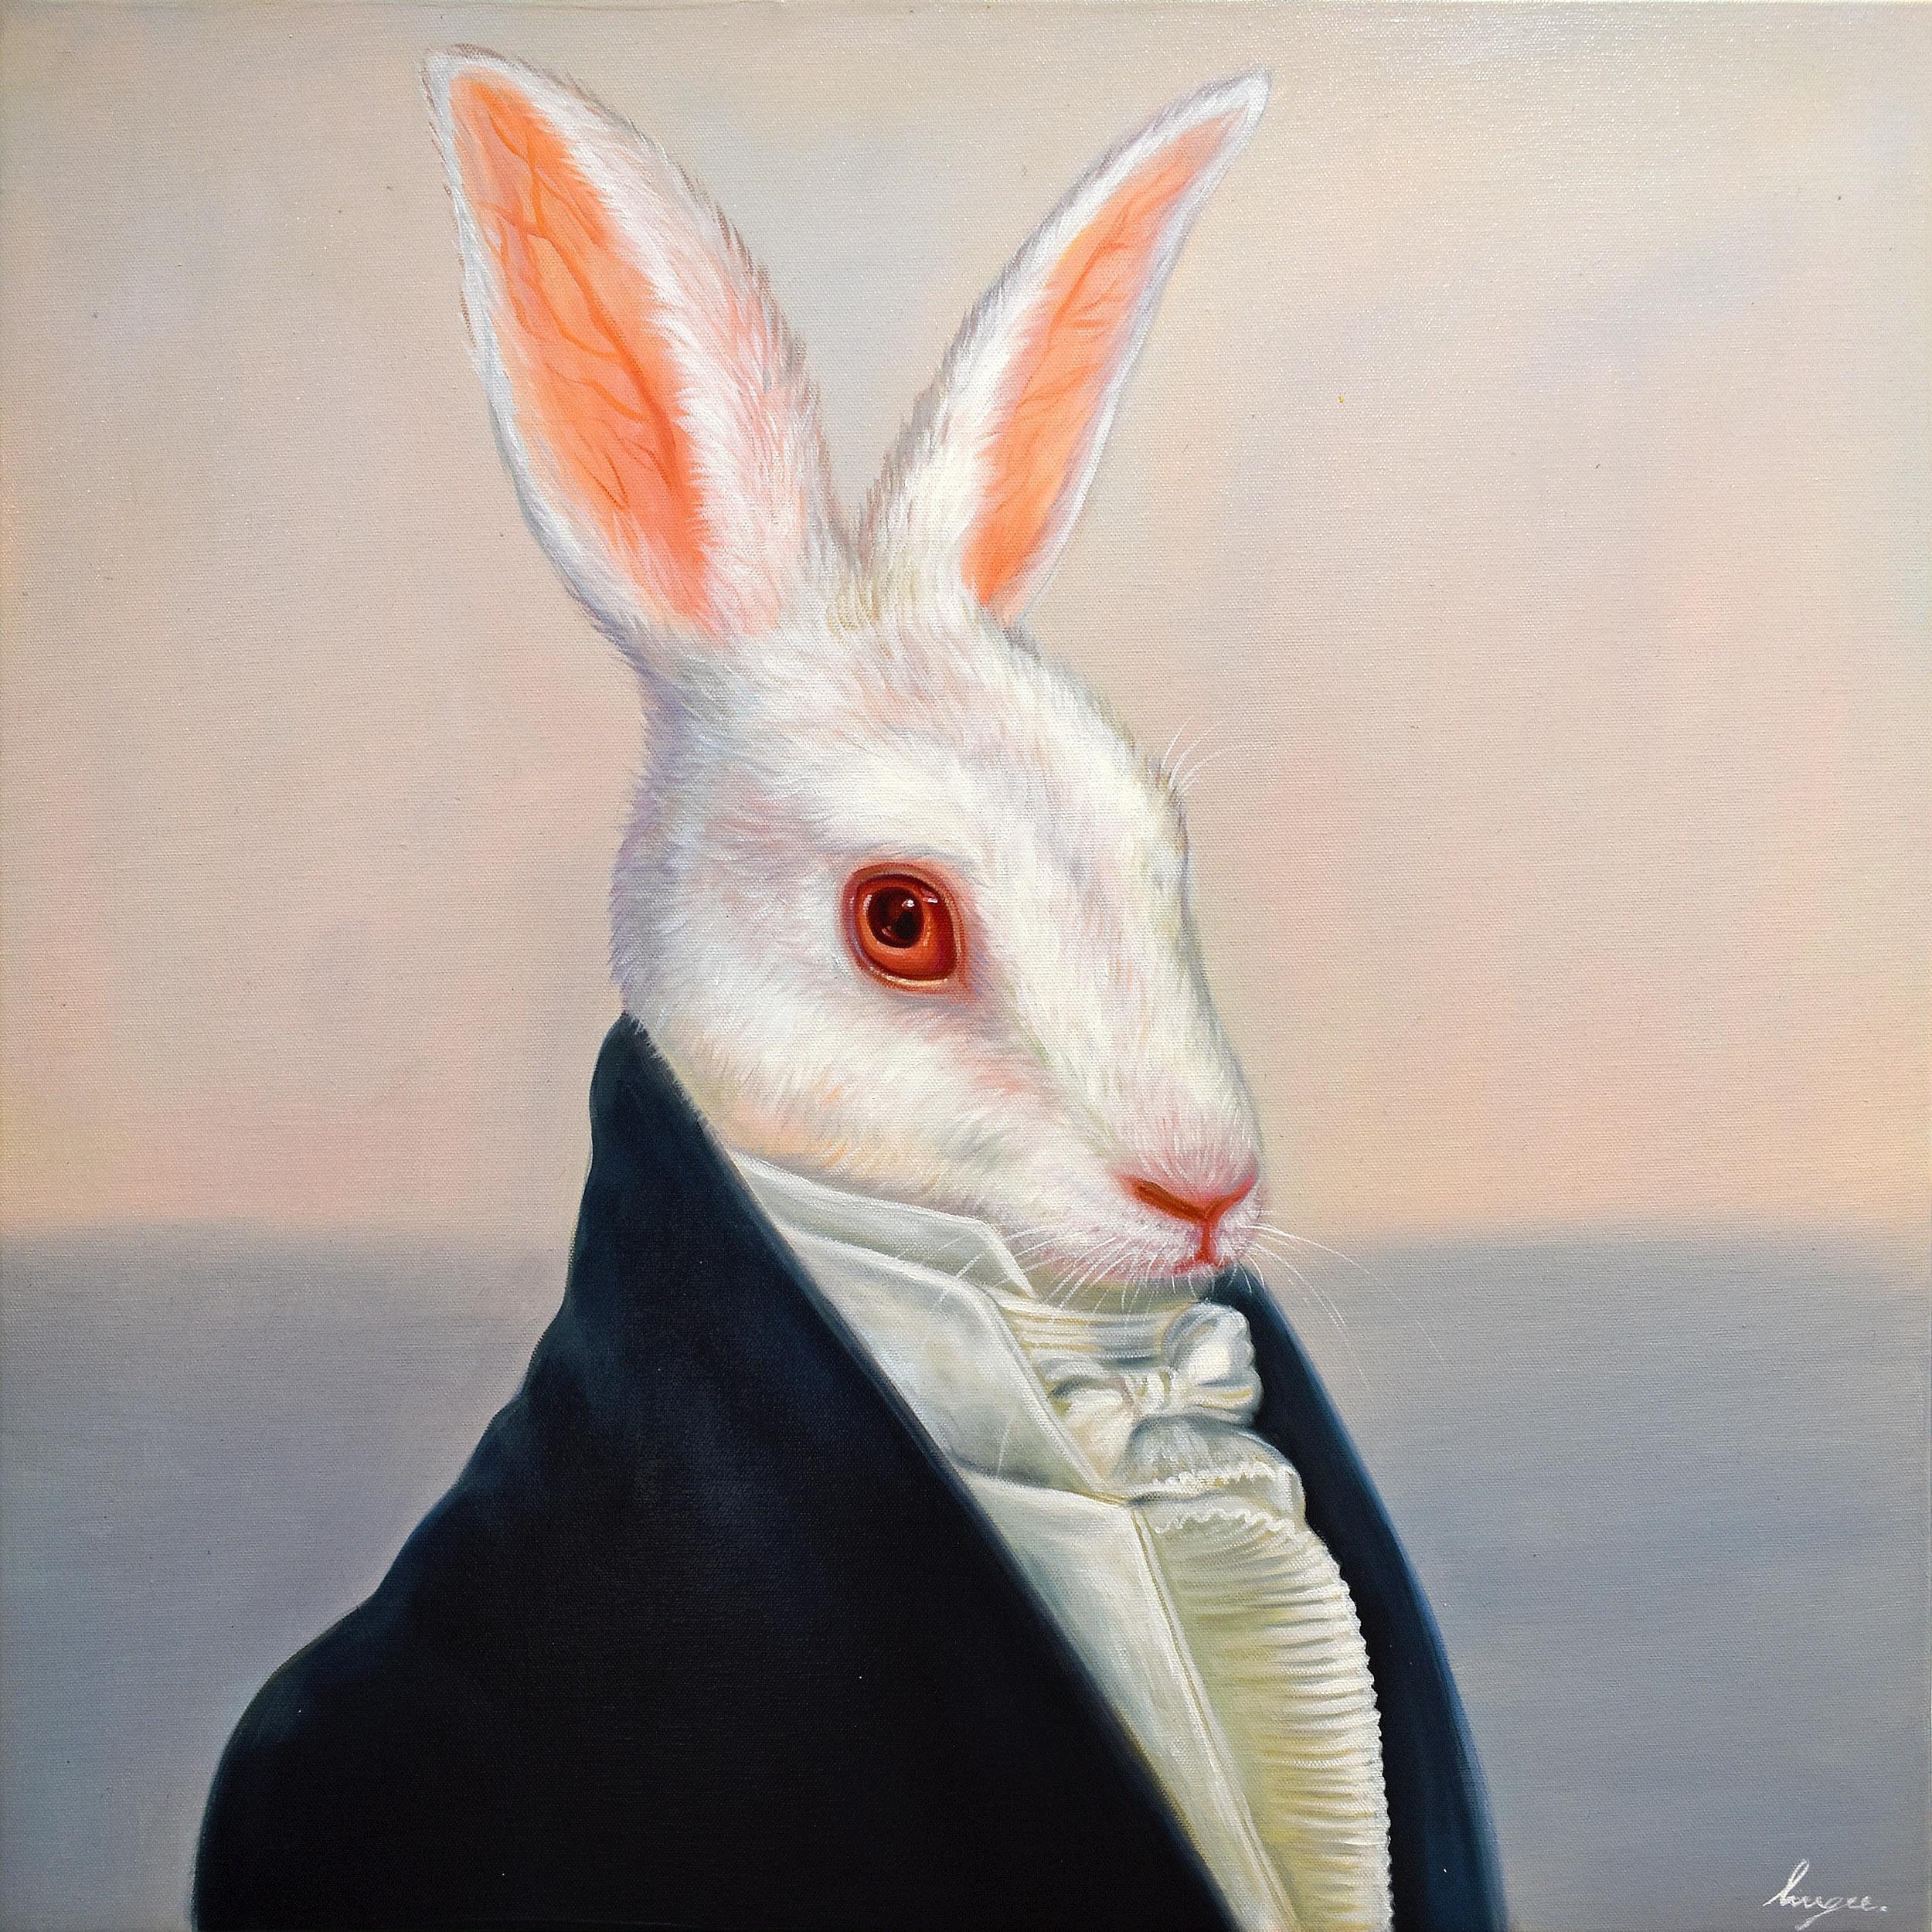 Lingee Bangkhuntod Animal Painting - Dapper Rabbits - Sir White. Rabbit in Vintage Clothing. Oil Painting